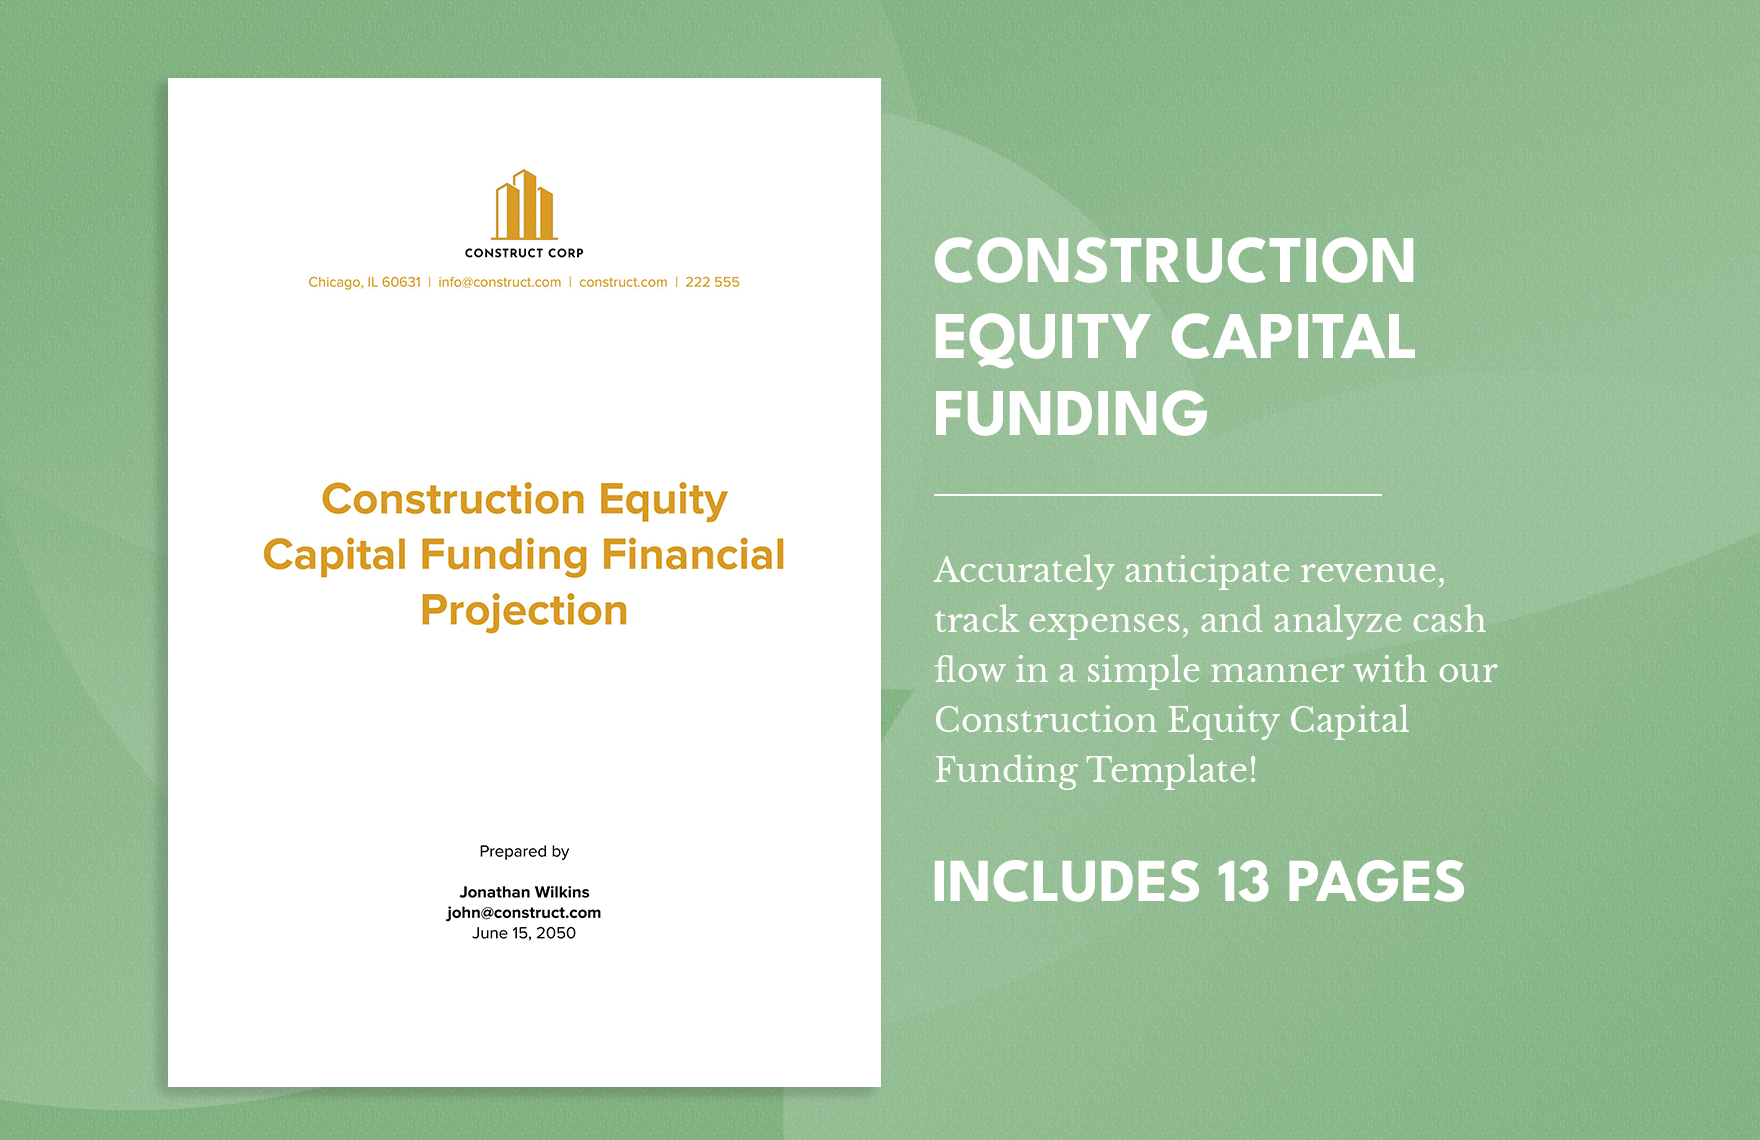 Construction Equity Capital Funding